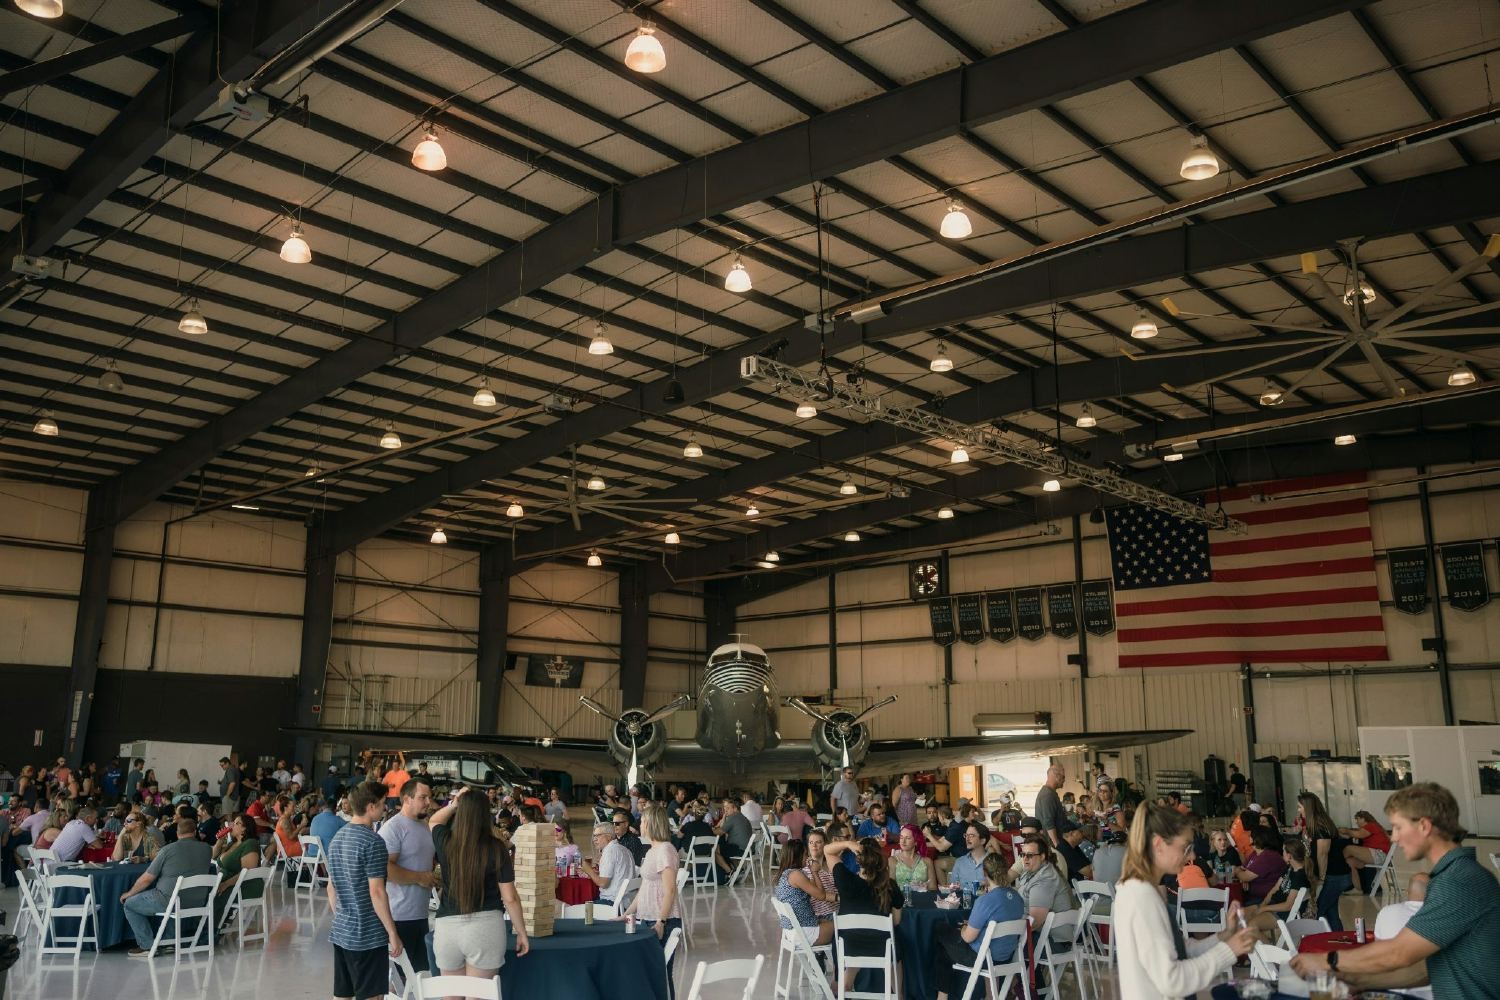 A mid-year show of appreciation for employees at the annual hangar bash.